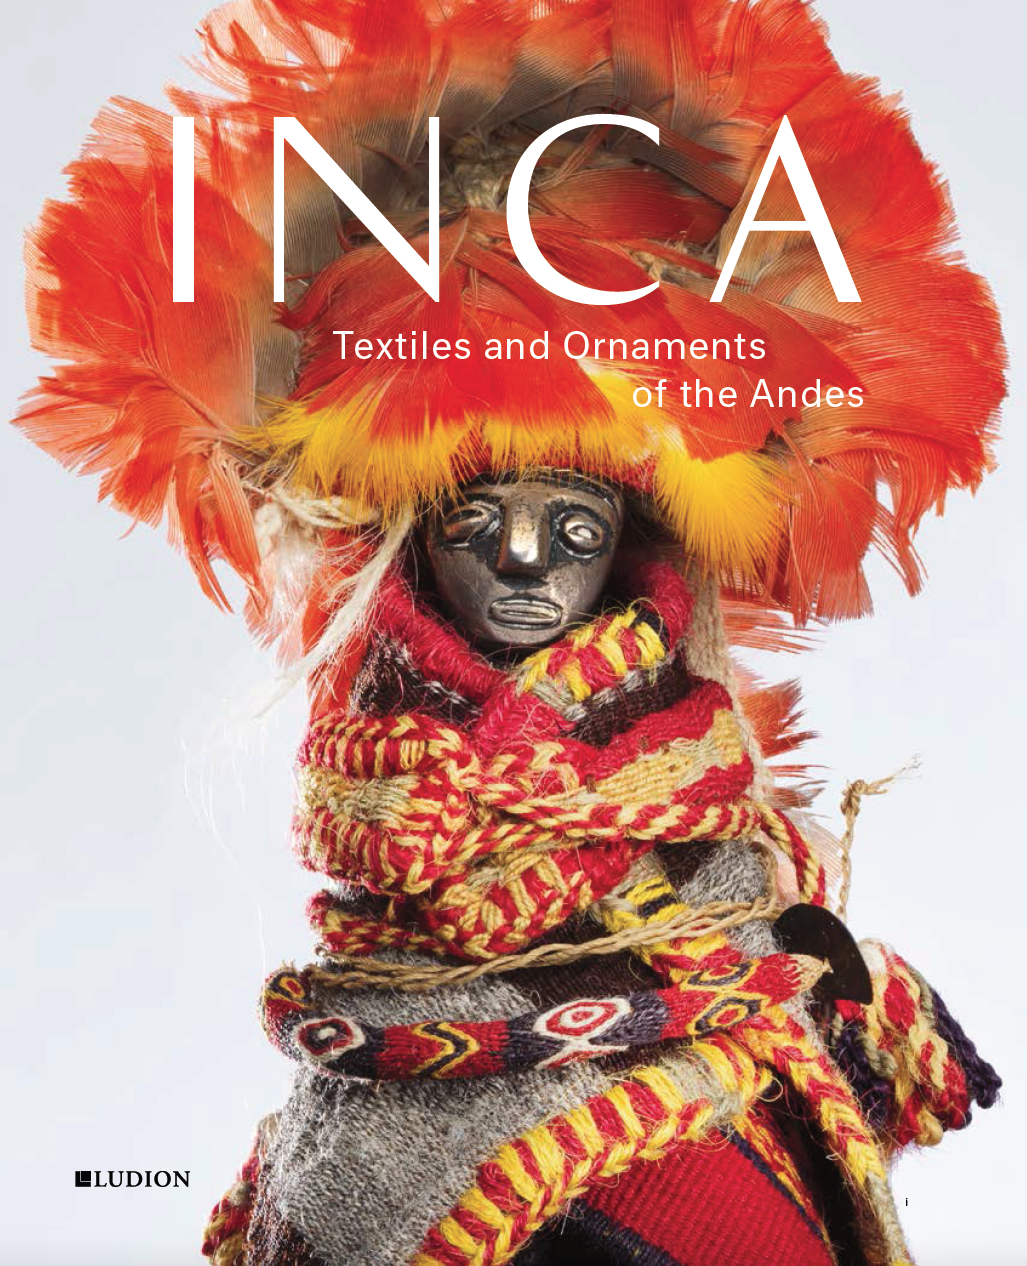 INCA – Textiles and Ornaments of the Andes